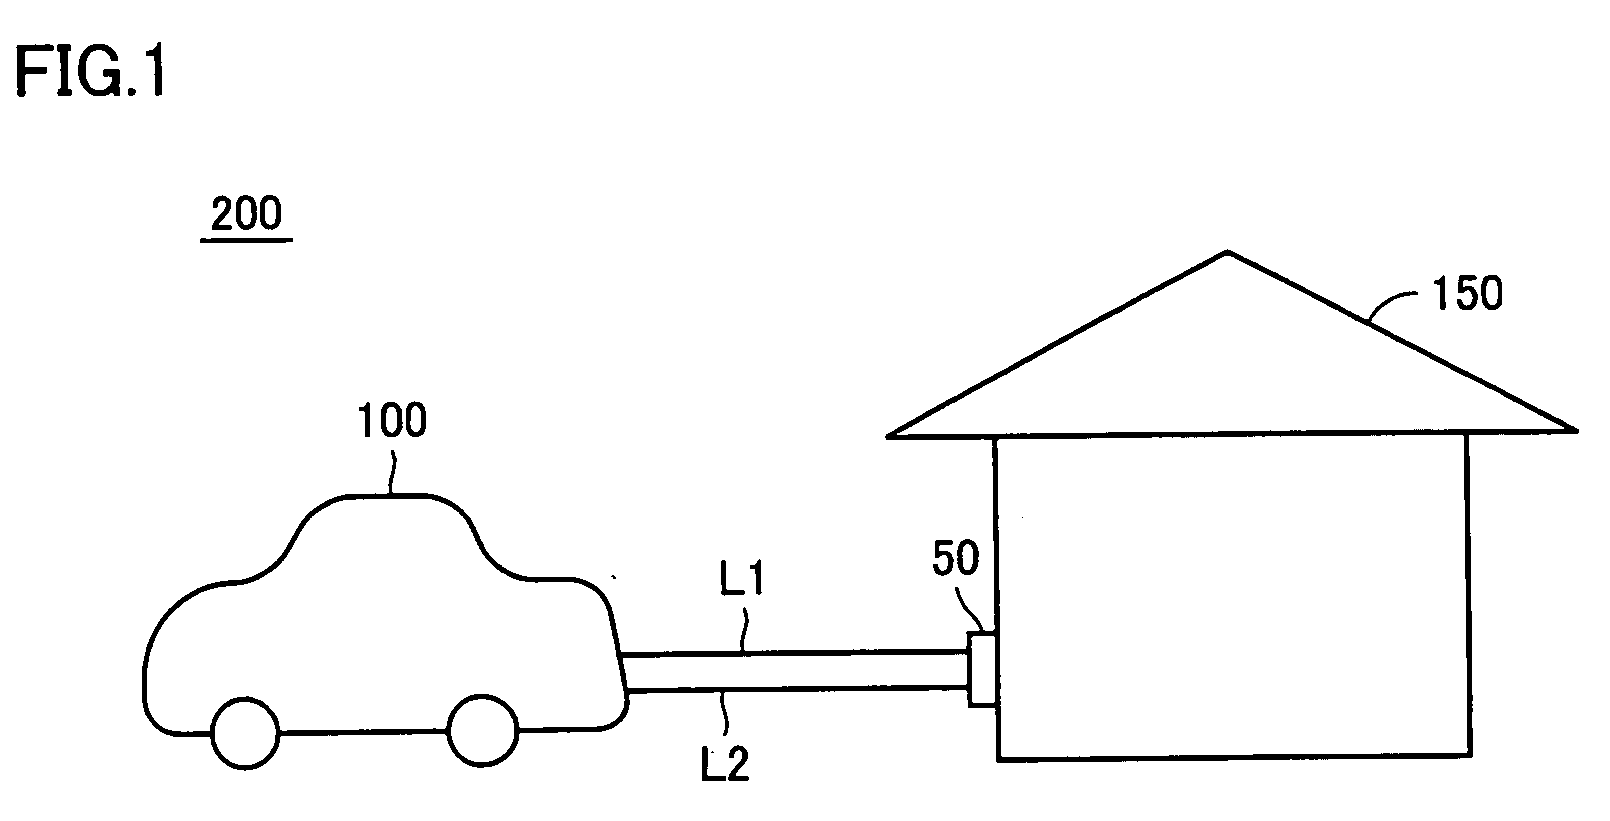 Electrical System, Hybrid Vehicle and Method of Controlling Hybrid Vehicle